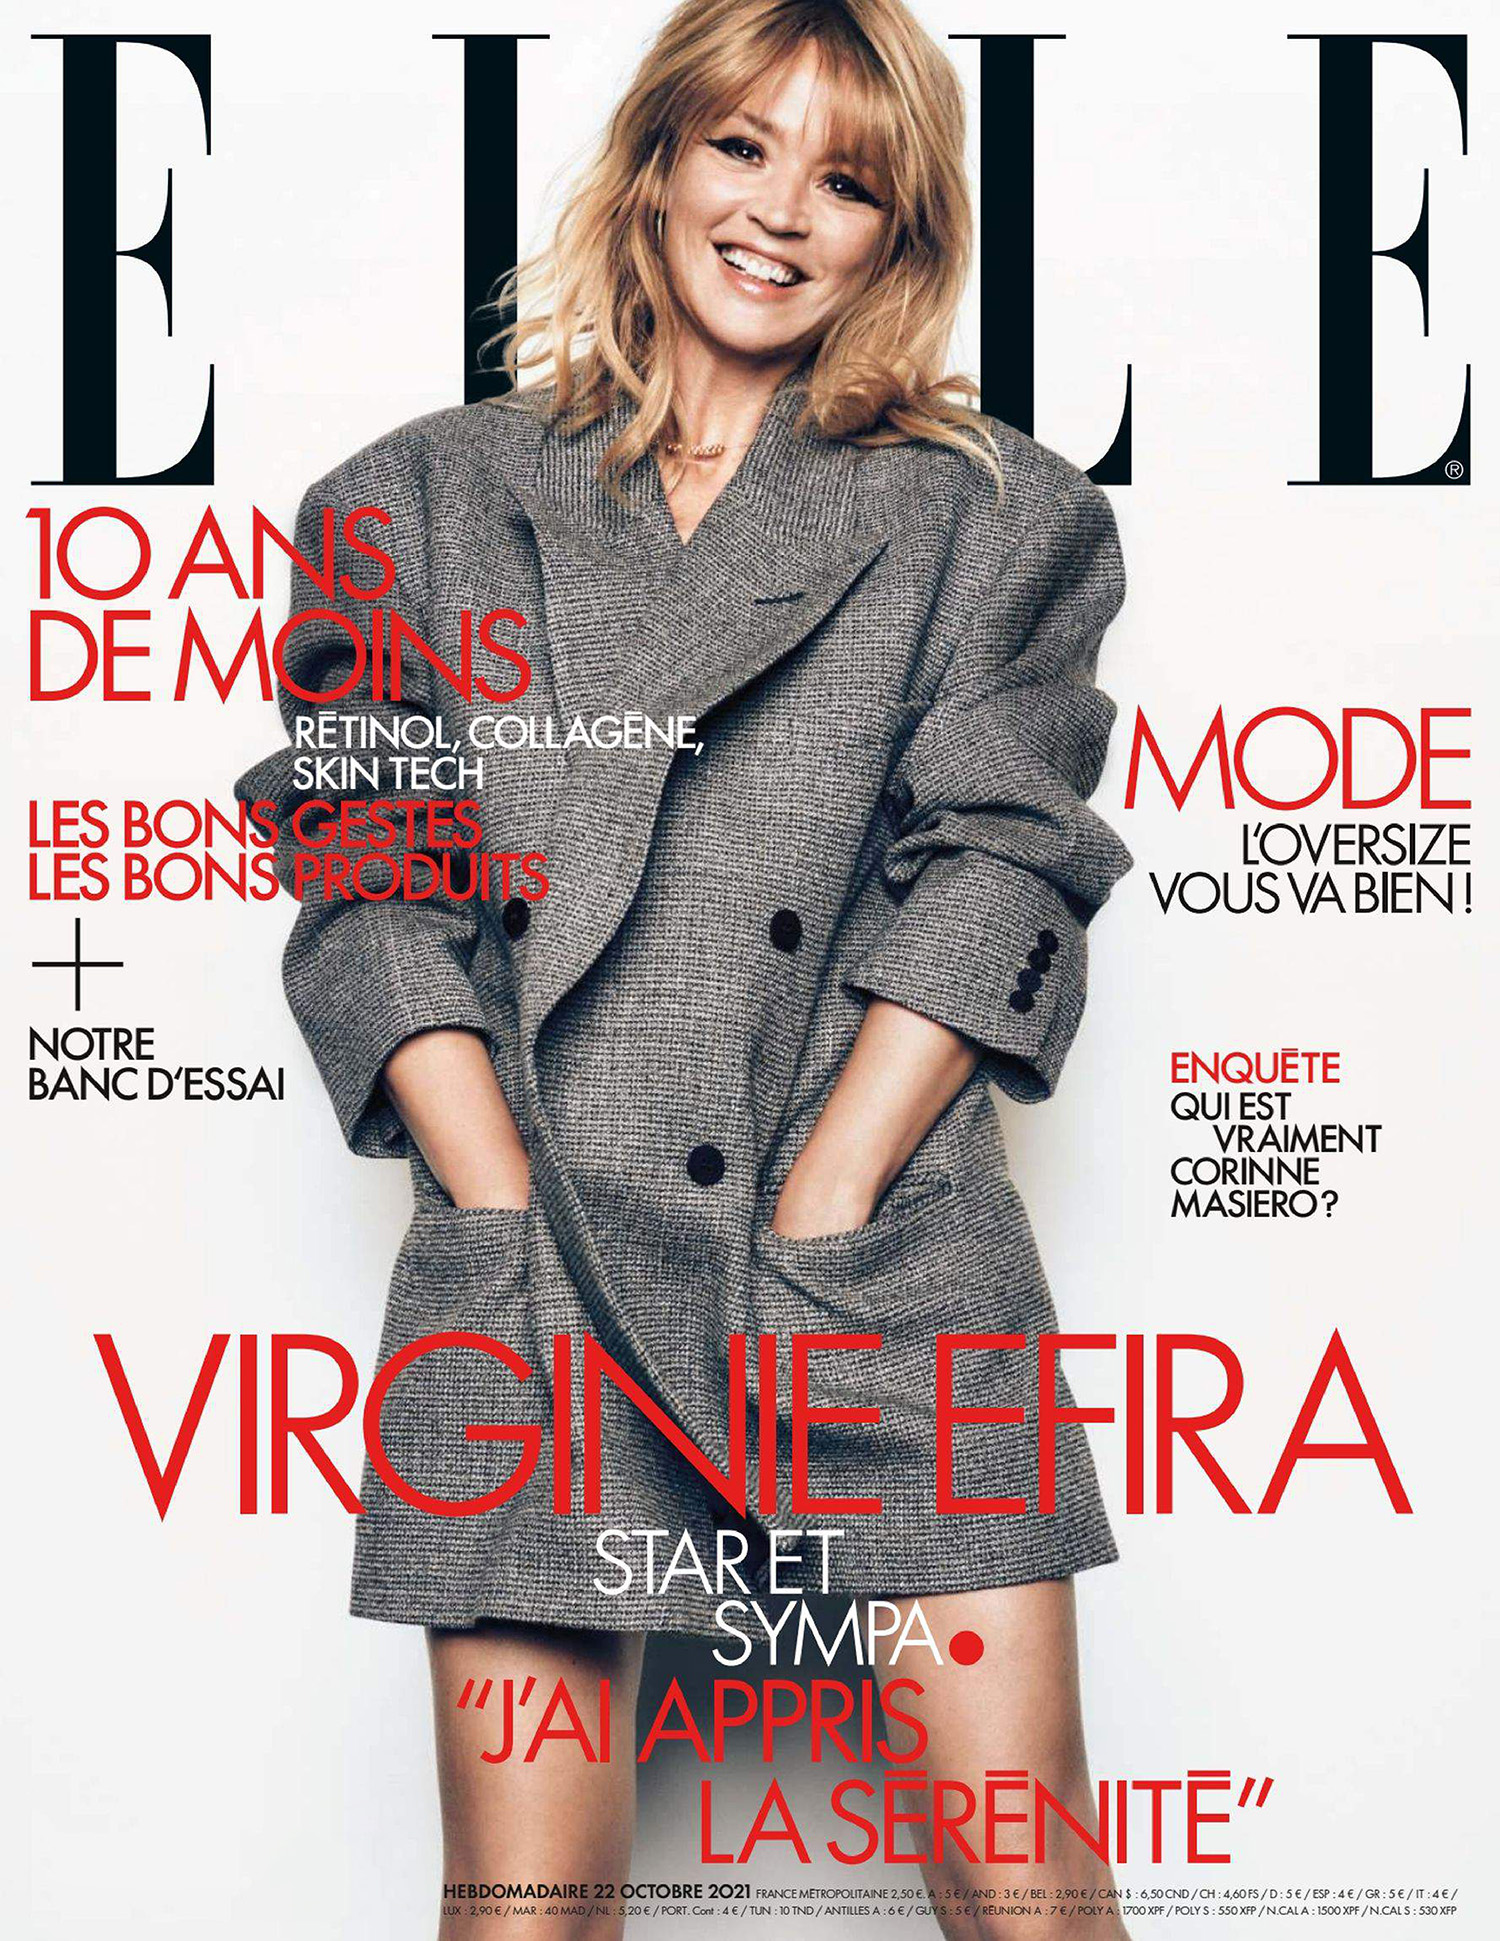 Virginie Efira covers Elle France October 22nd, 2021 by Jan Welters